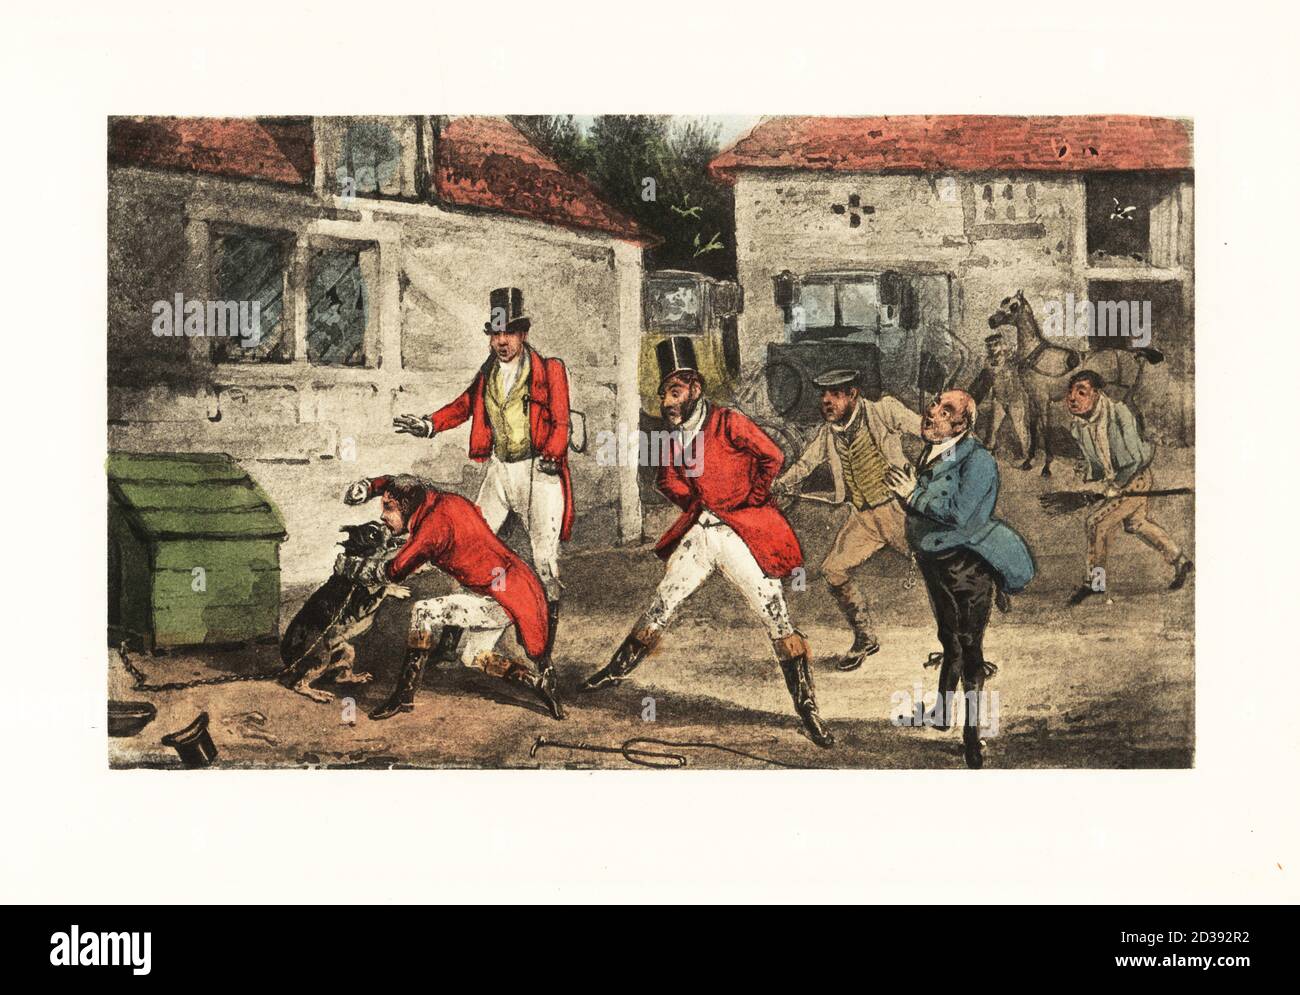 English gentleman biting a dog and beating it while chained in a yard. Other hunters watch in horror. Mytton masters the savage dog. Chromolithographic facsimile of an illustration by Henry Thomas Alken from Memoirs of the Life of the Late John Mytton by Nimrod aka Charles James Apperley, Kegan Paul, London, 1900. Stock Photo